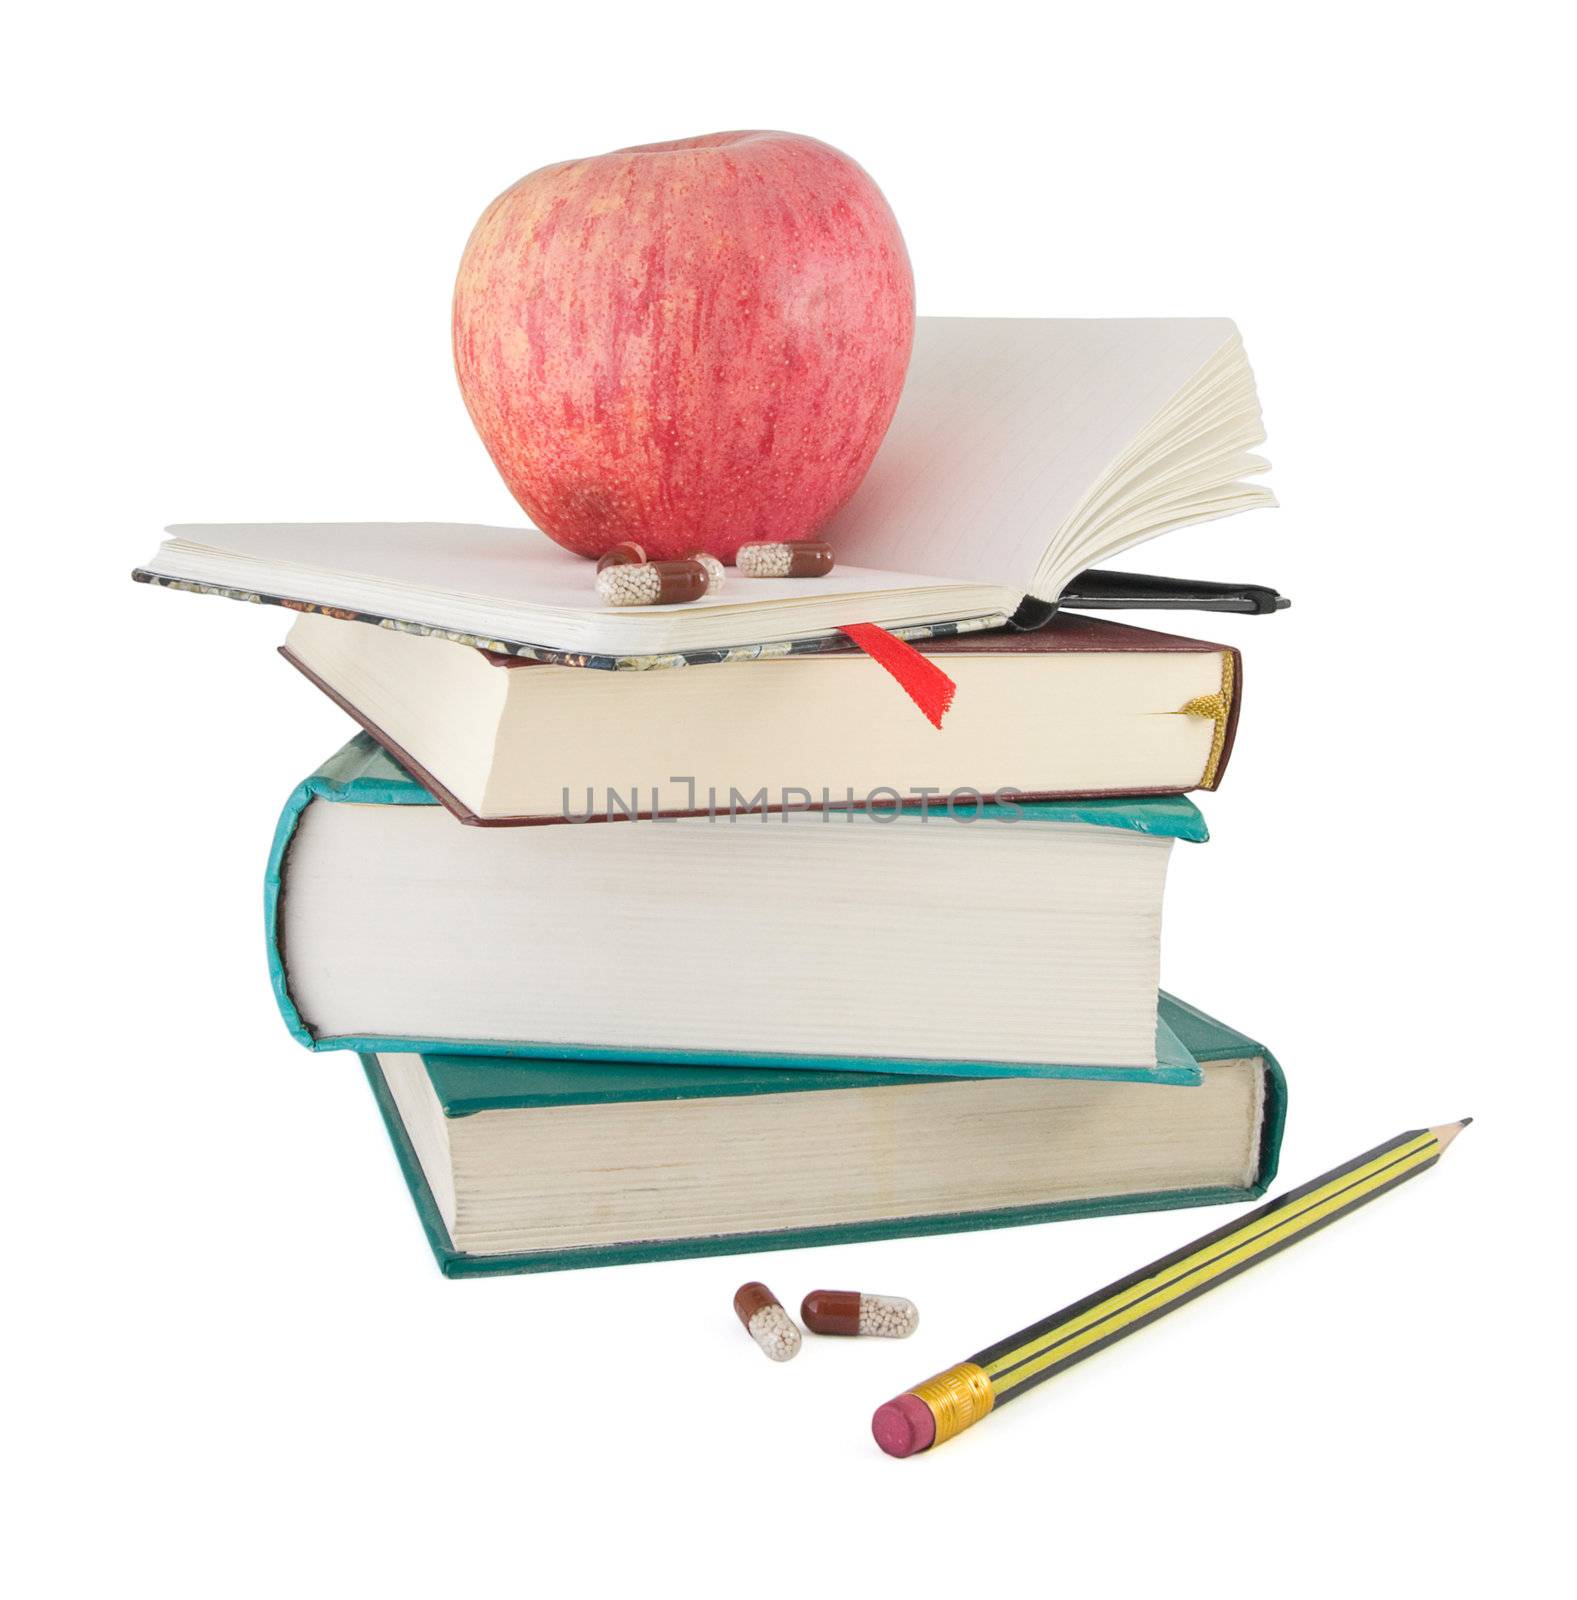 Pills and red apple on textbook pile as metaphor of efective learning